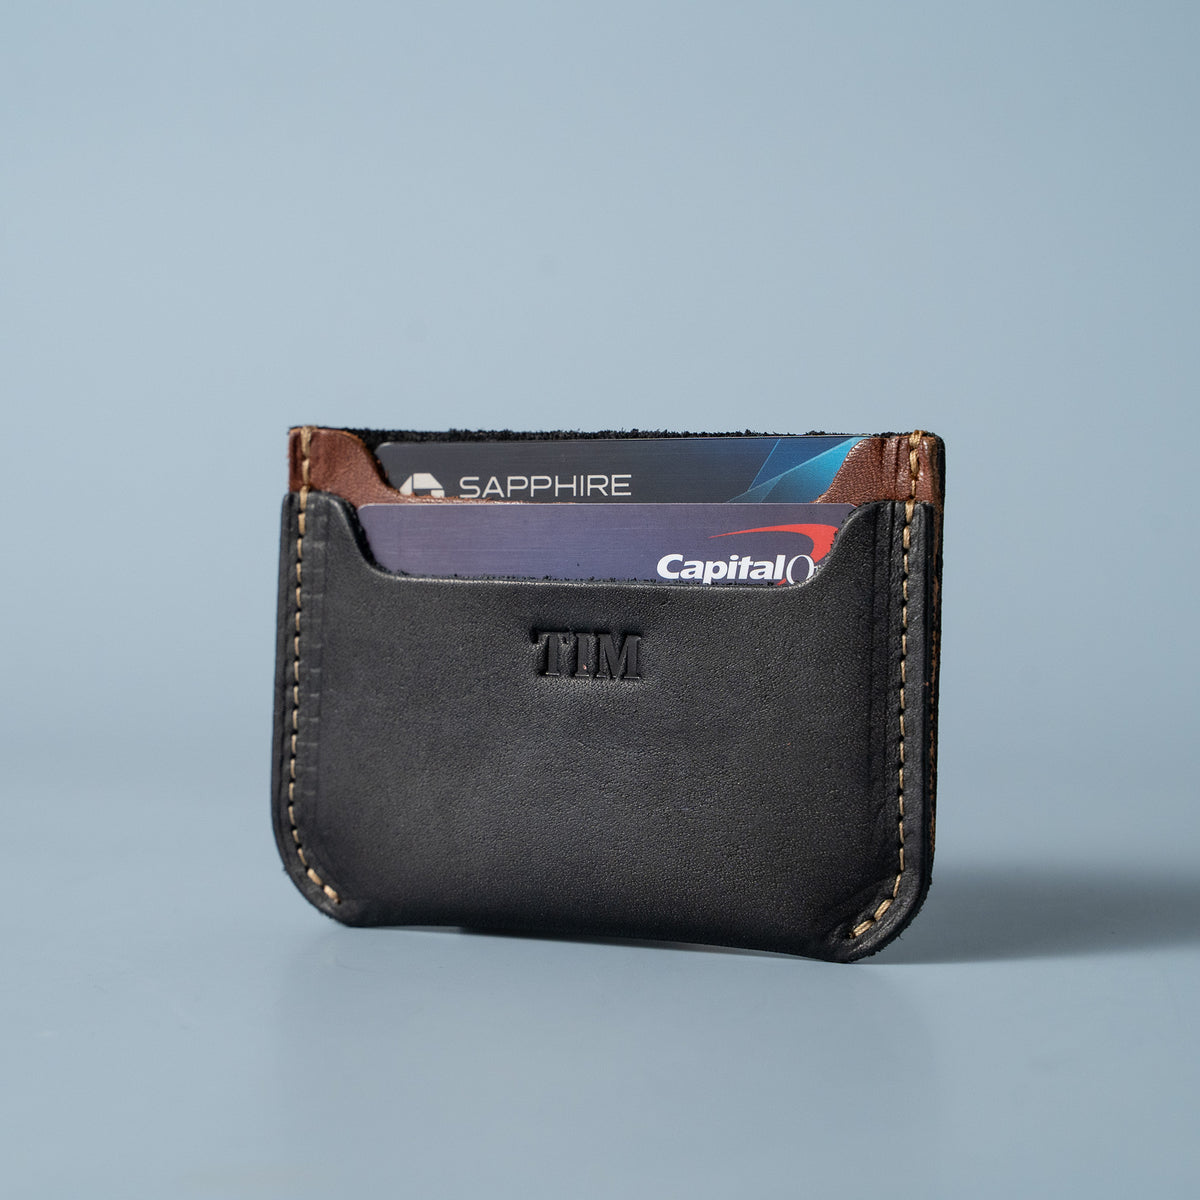 The Bradford Front Pocket Double Sleeve Fine Leather Wallet